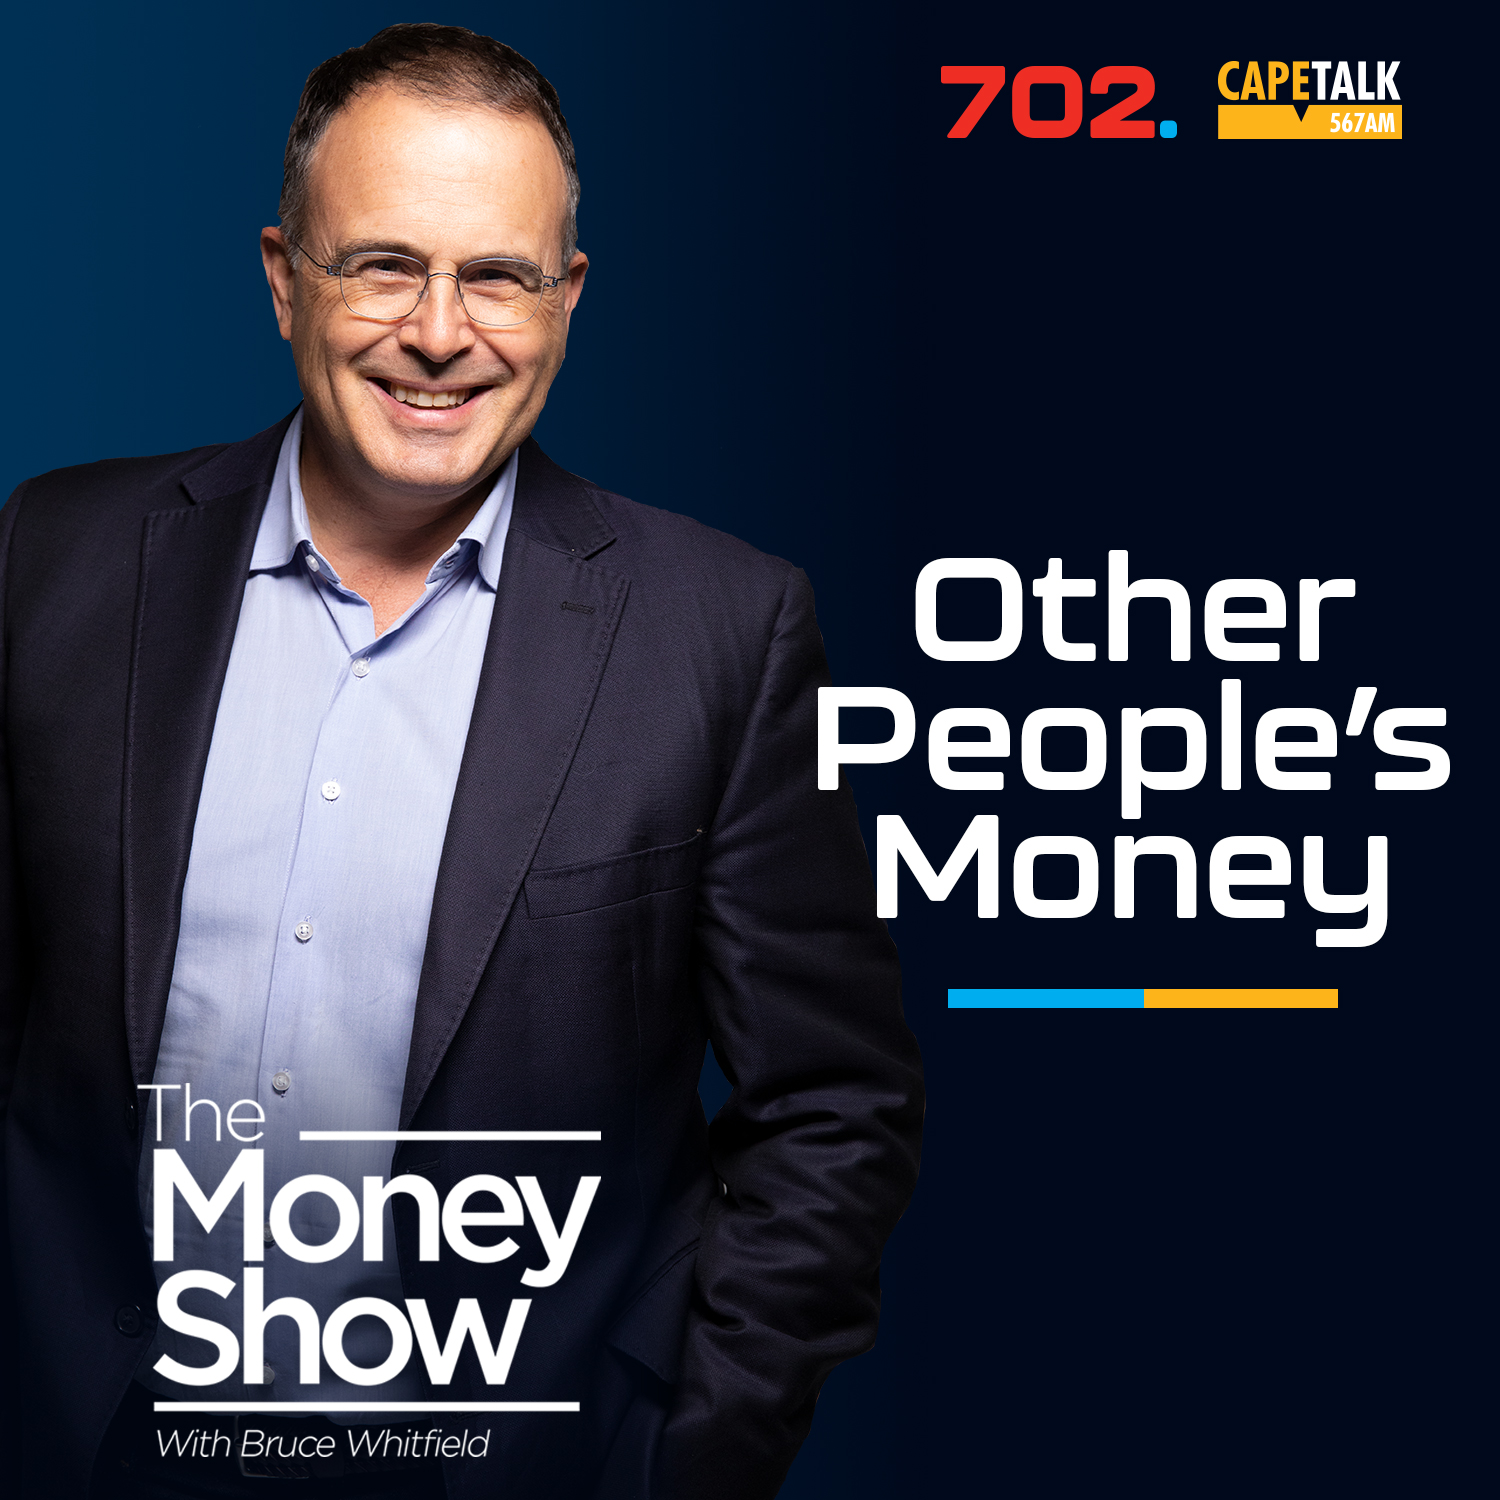 Other People’s Money - Tim Harford -  the Undercover Economist